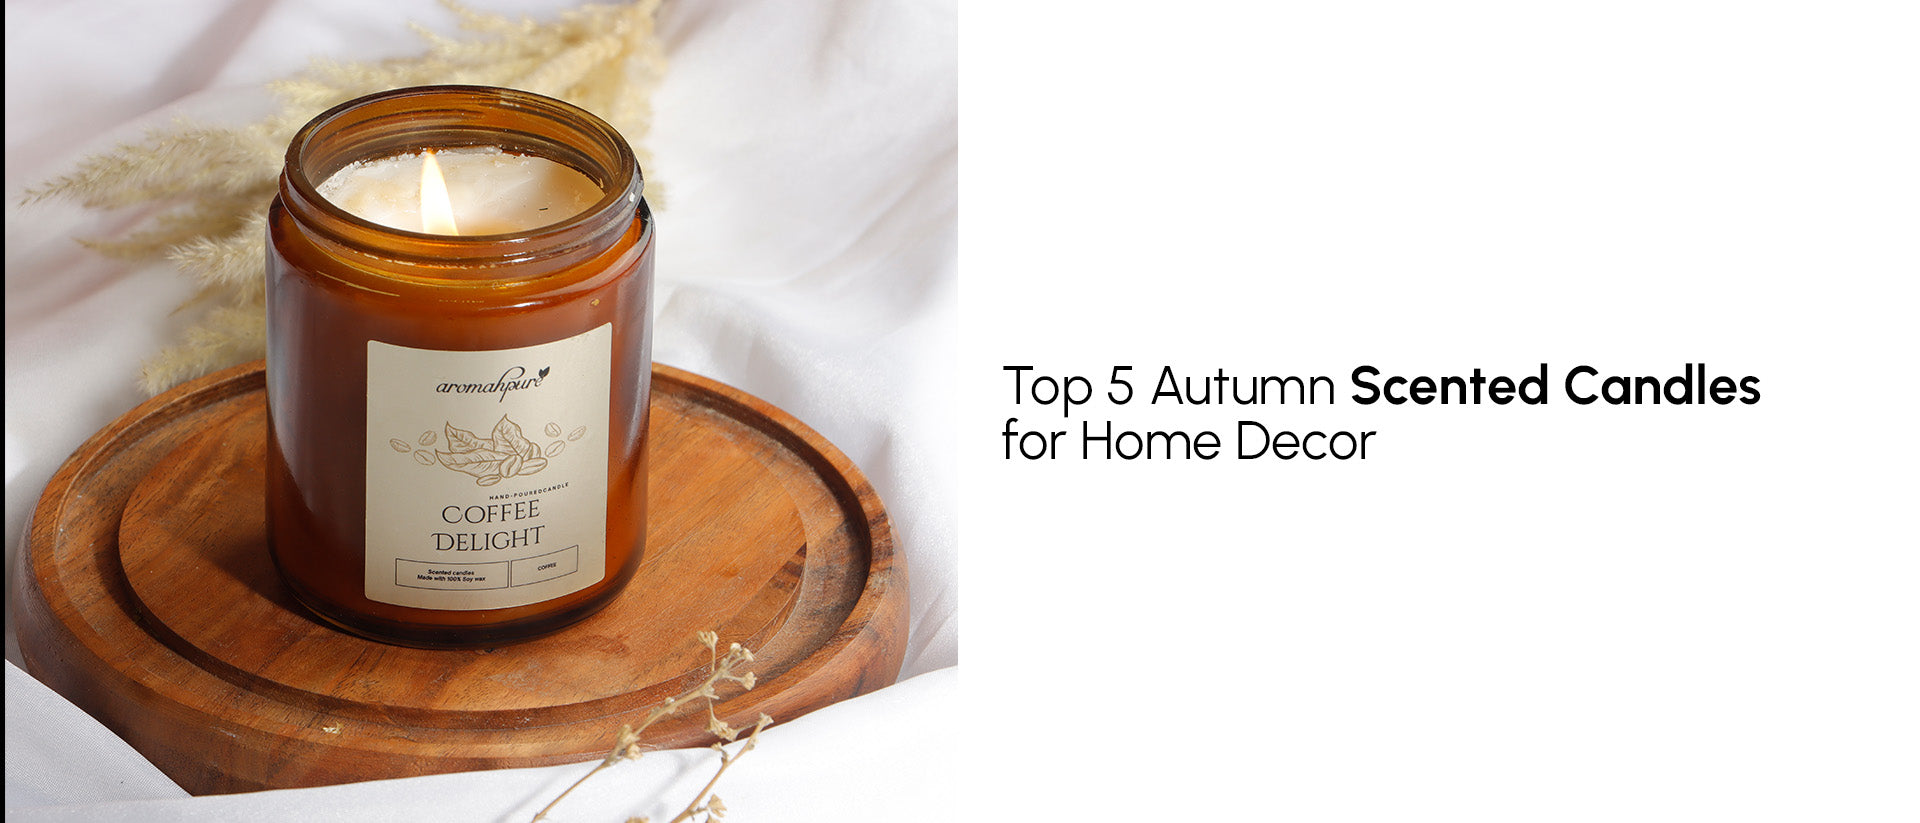 Top 5 Autumn Scented Candles for Home Decor